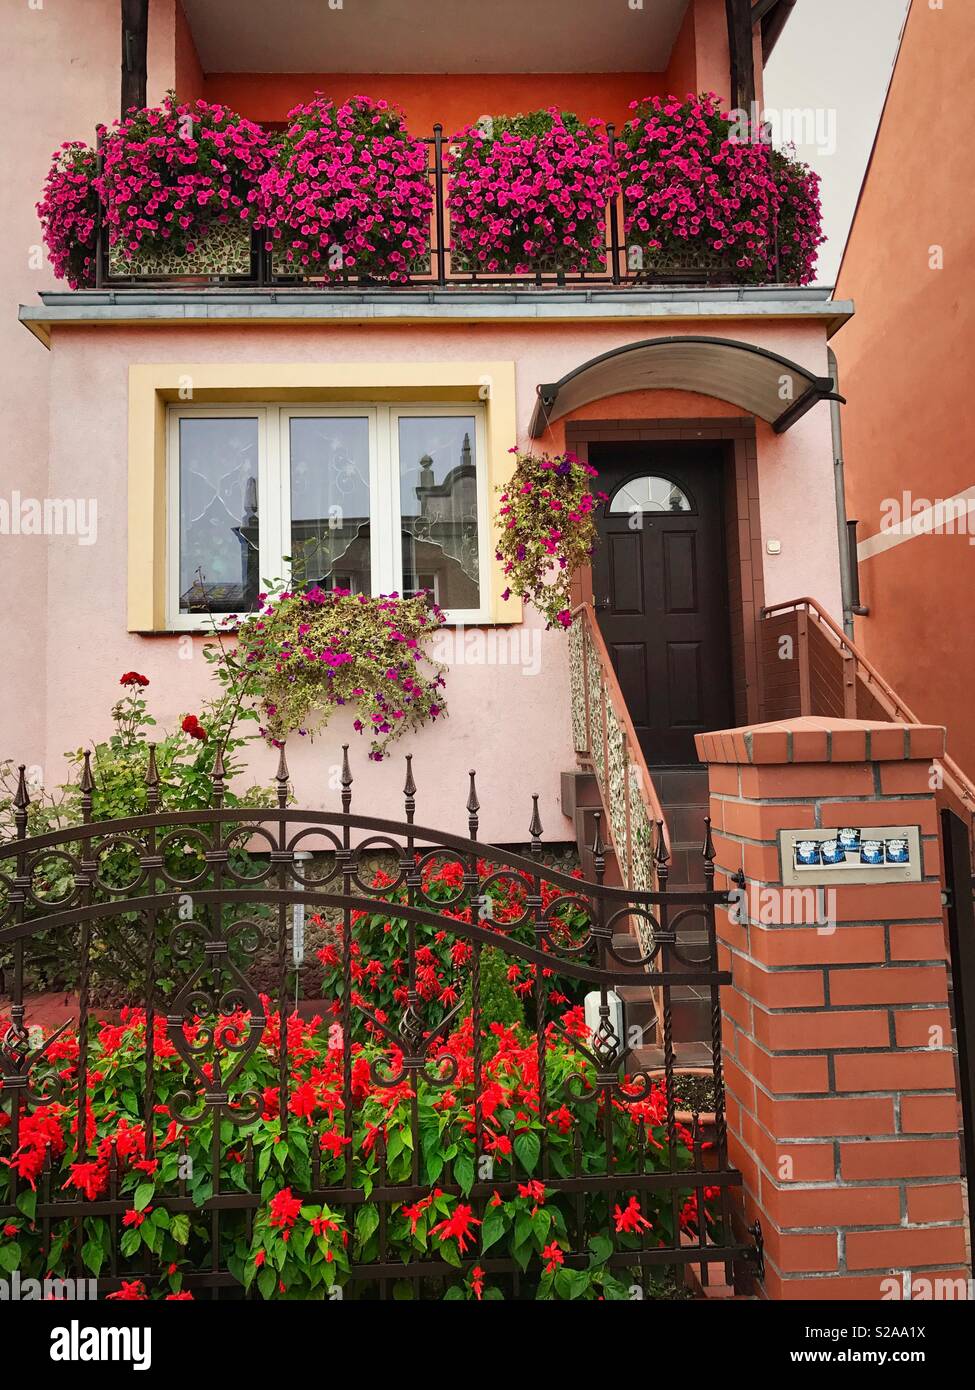 Front of a house with lots of colorful flowers planted in the garden and flower boxes Stock Photo